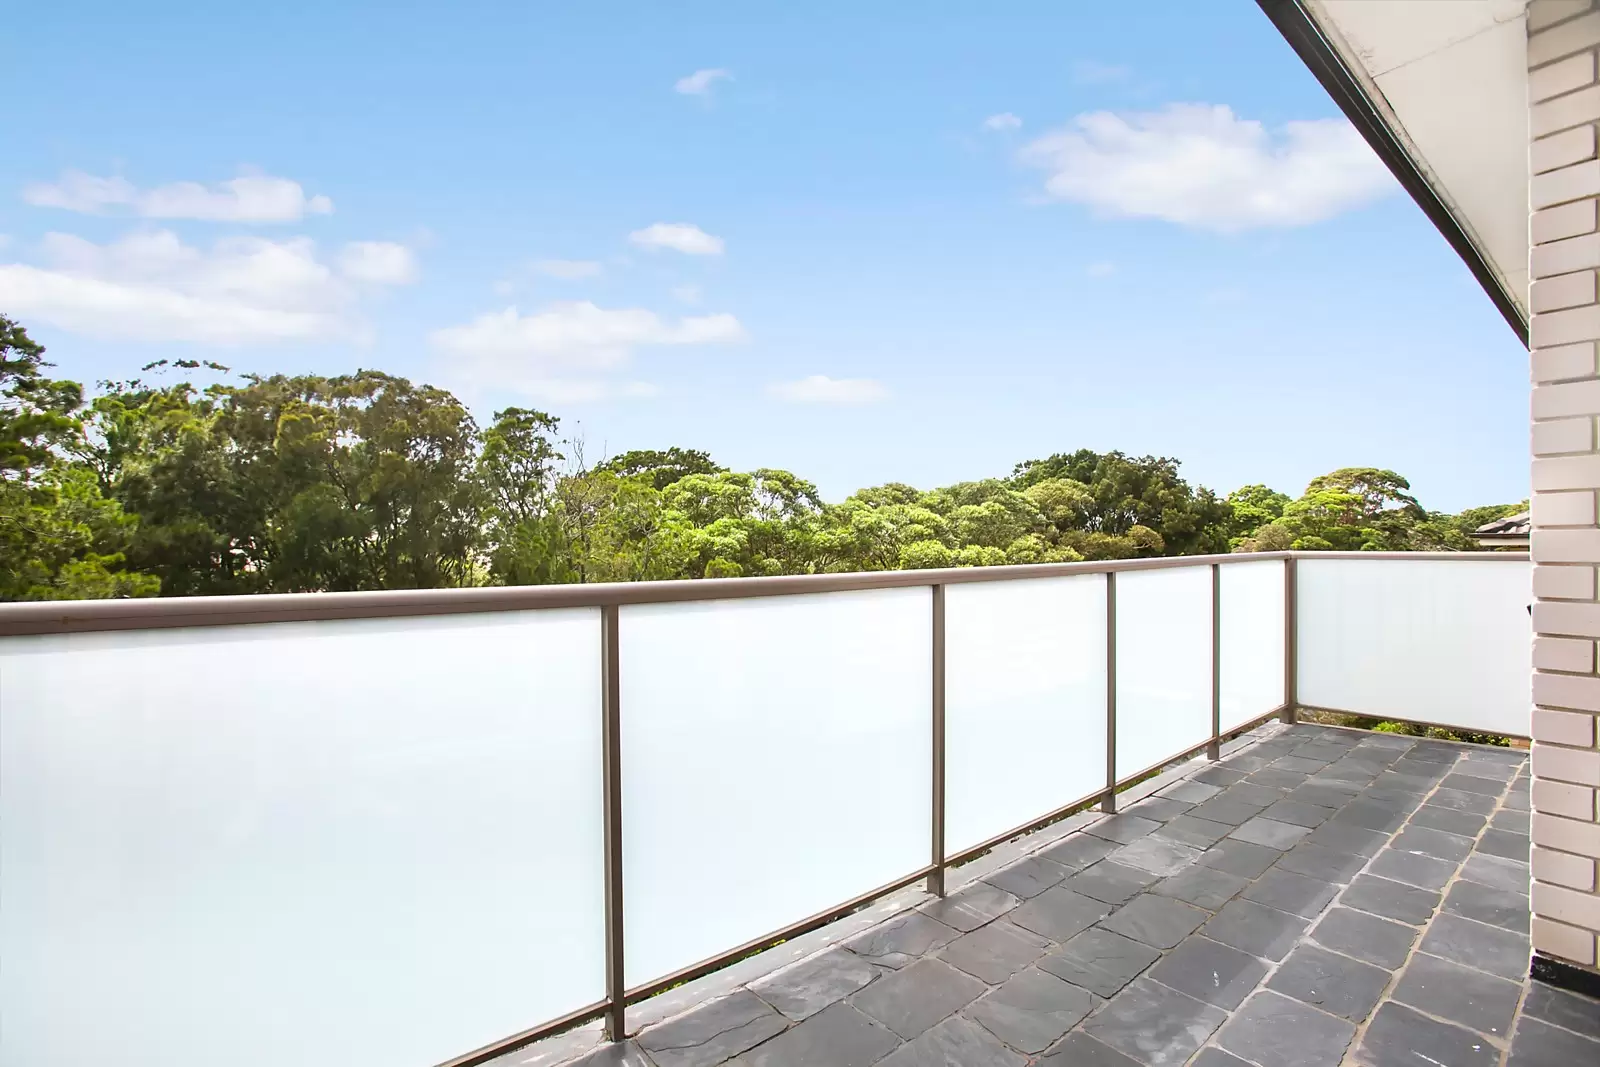 Photo #3: 6/863 Anzac Parade, Maroubra - Sold by Sydney Sotheby's International Realty